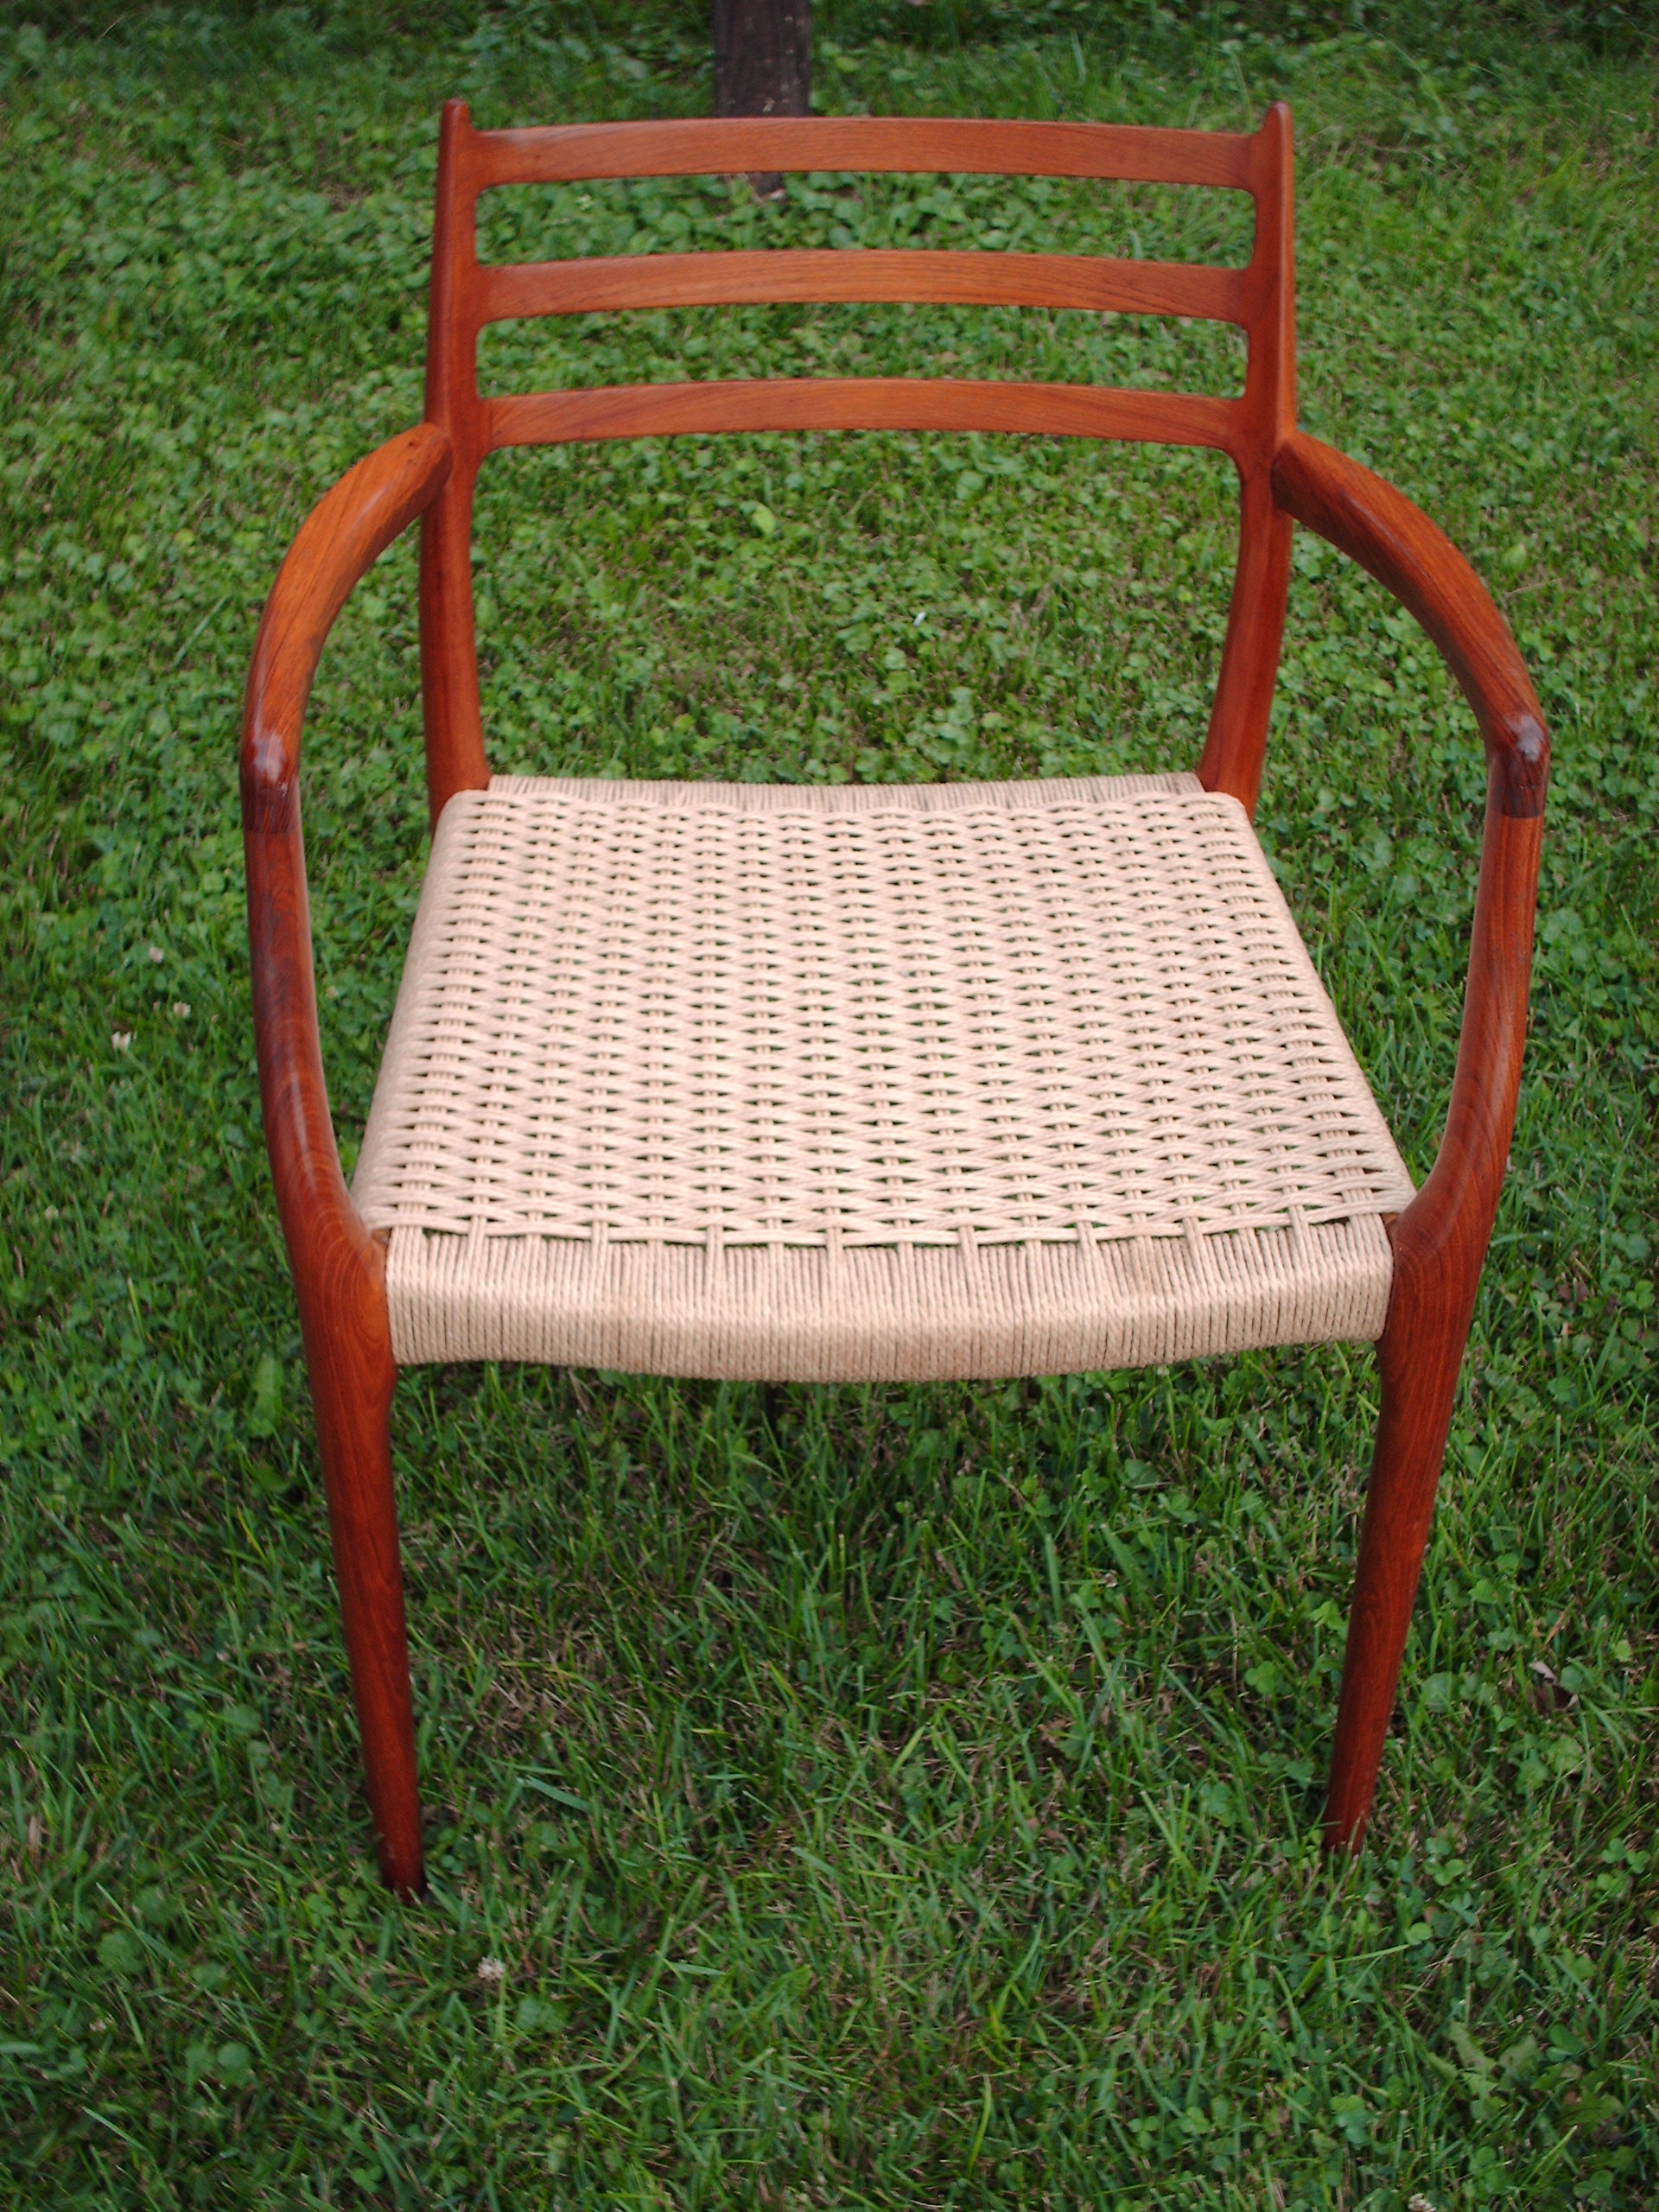 Danish Cord and Beech Rocking Chair, Denmark 1940s (sold) — H. Gallery,  Danish Cord 